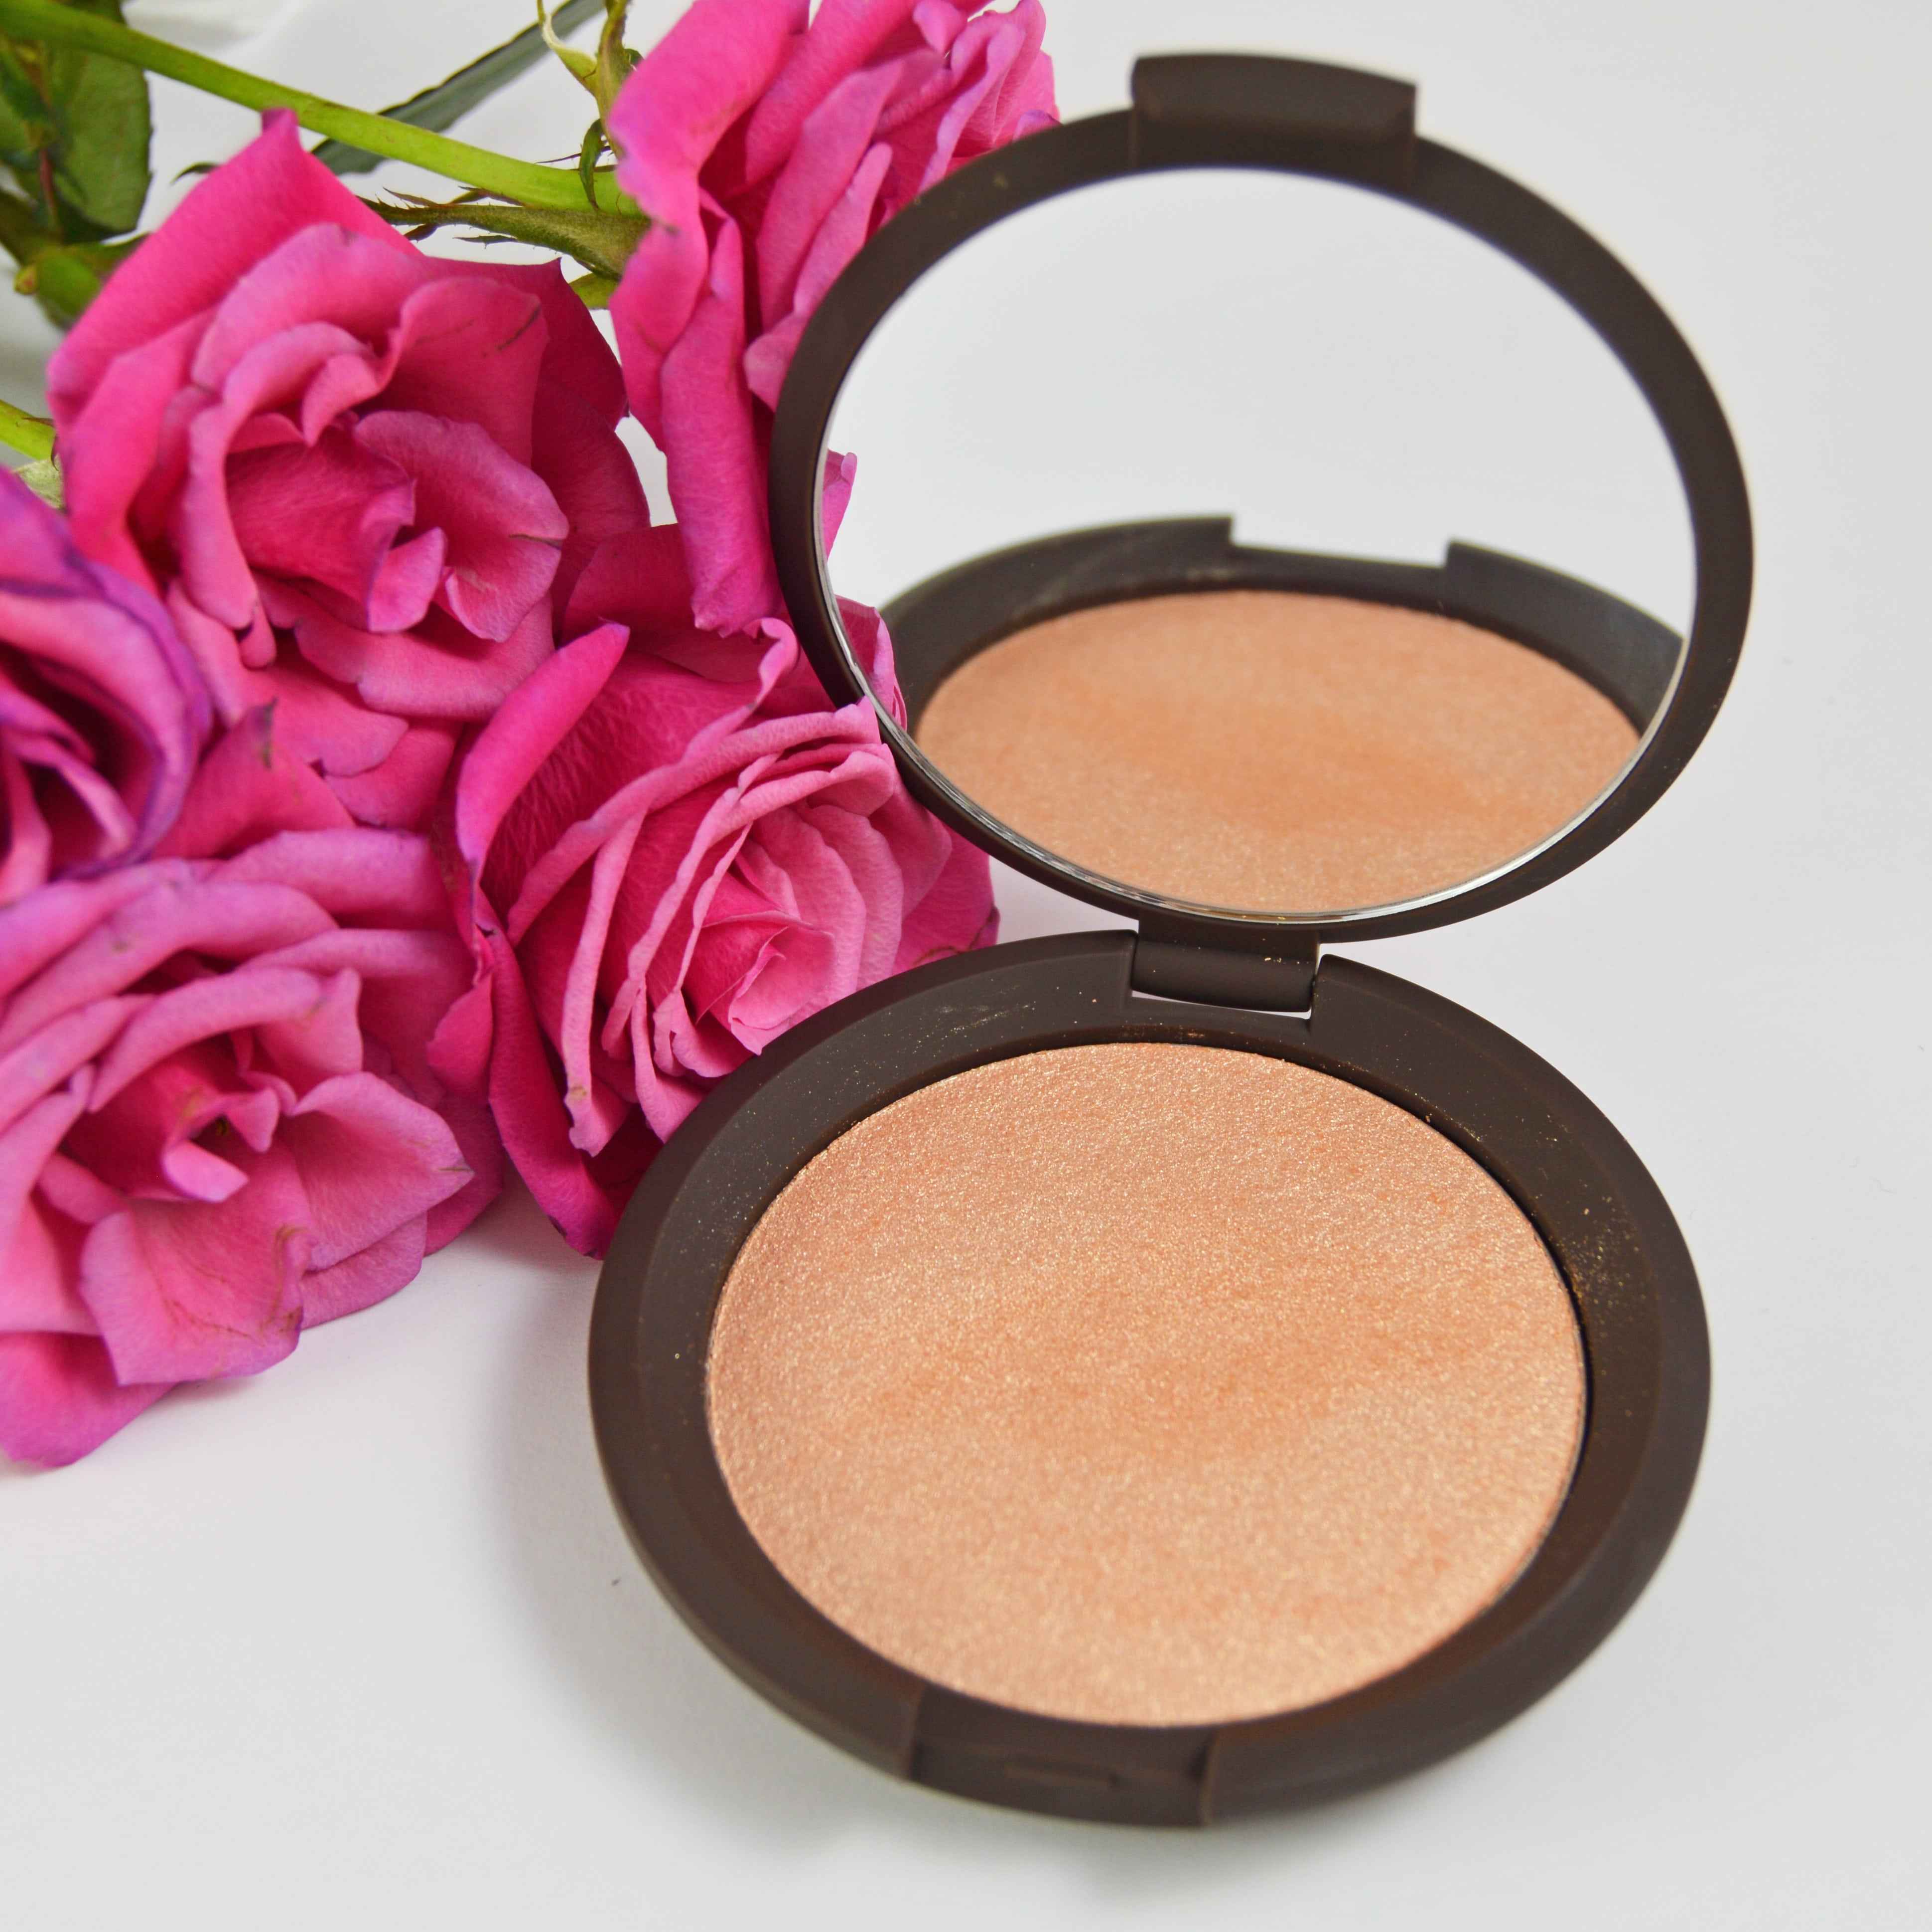 Becca - Shimmering Skin Perfector